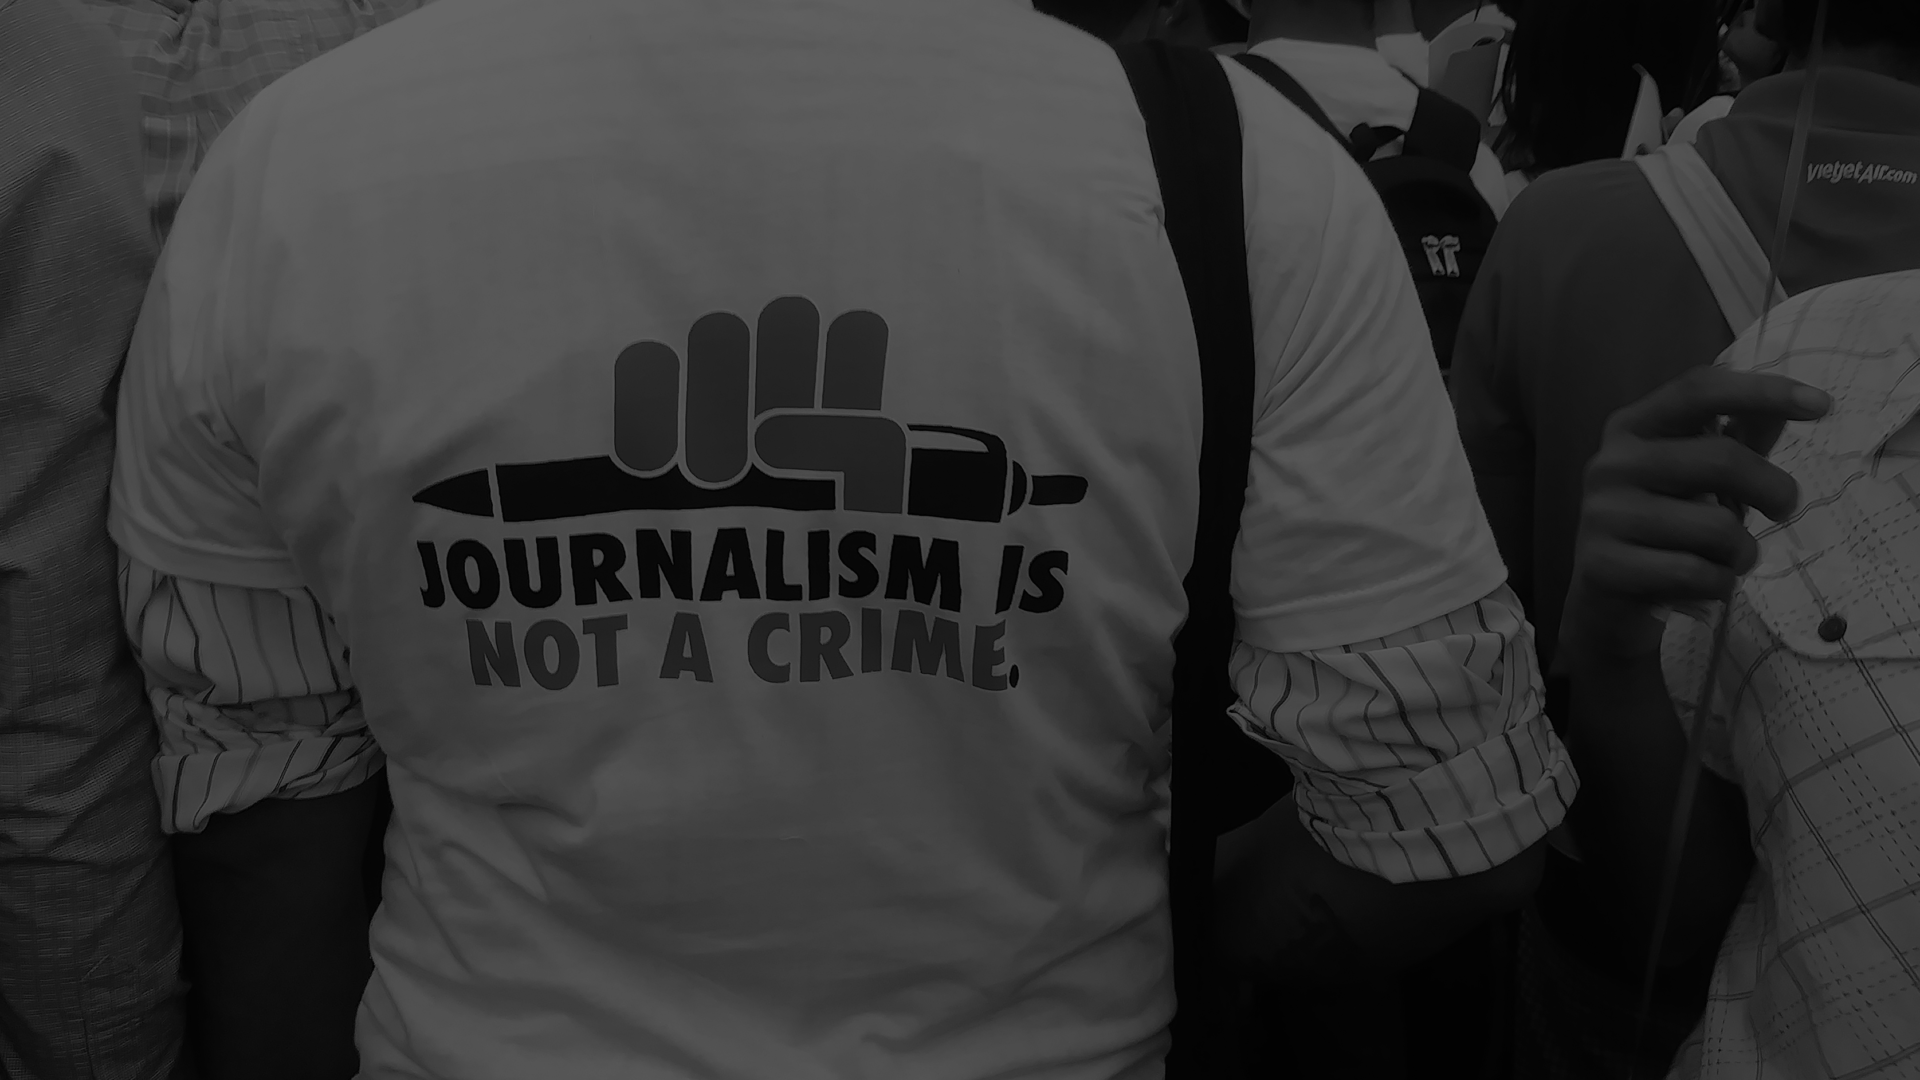 The back of a person in a crowd with a shirt that says Journalism is not a crime.